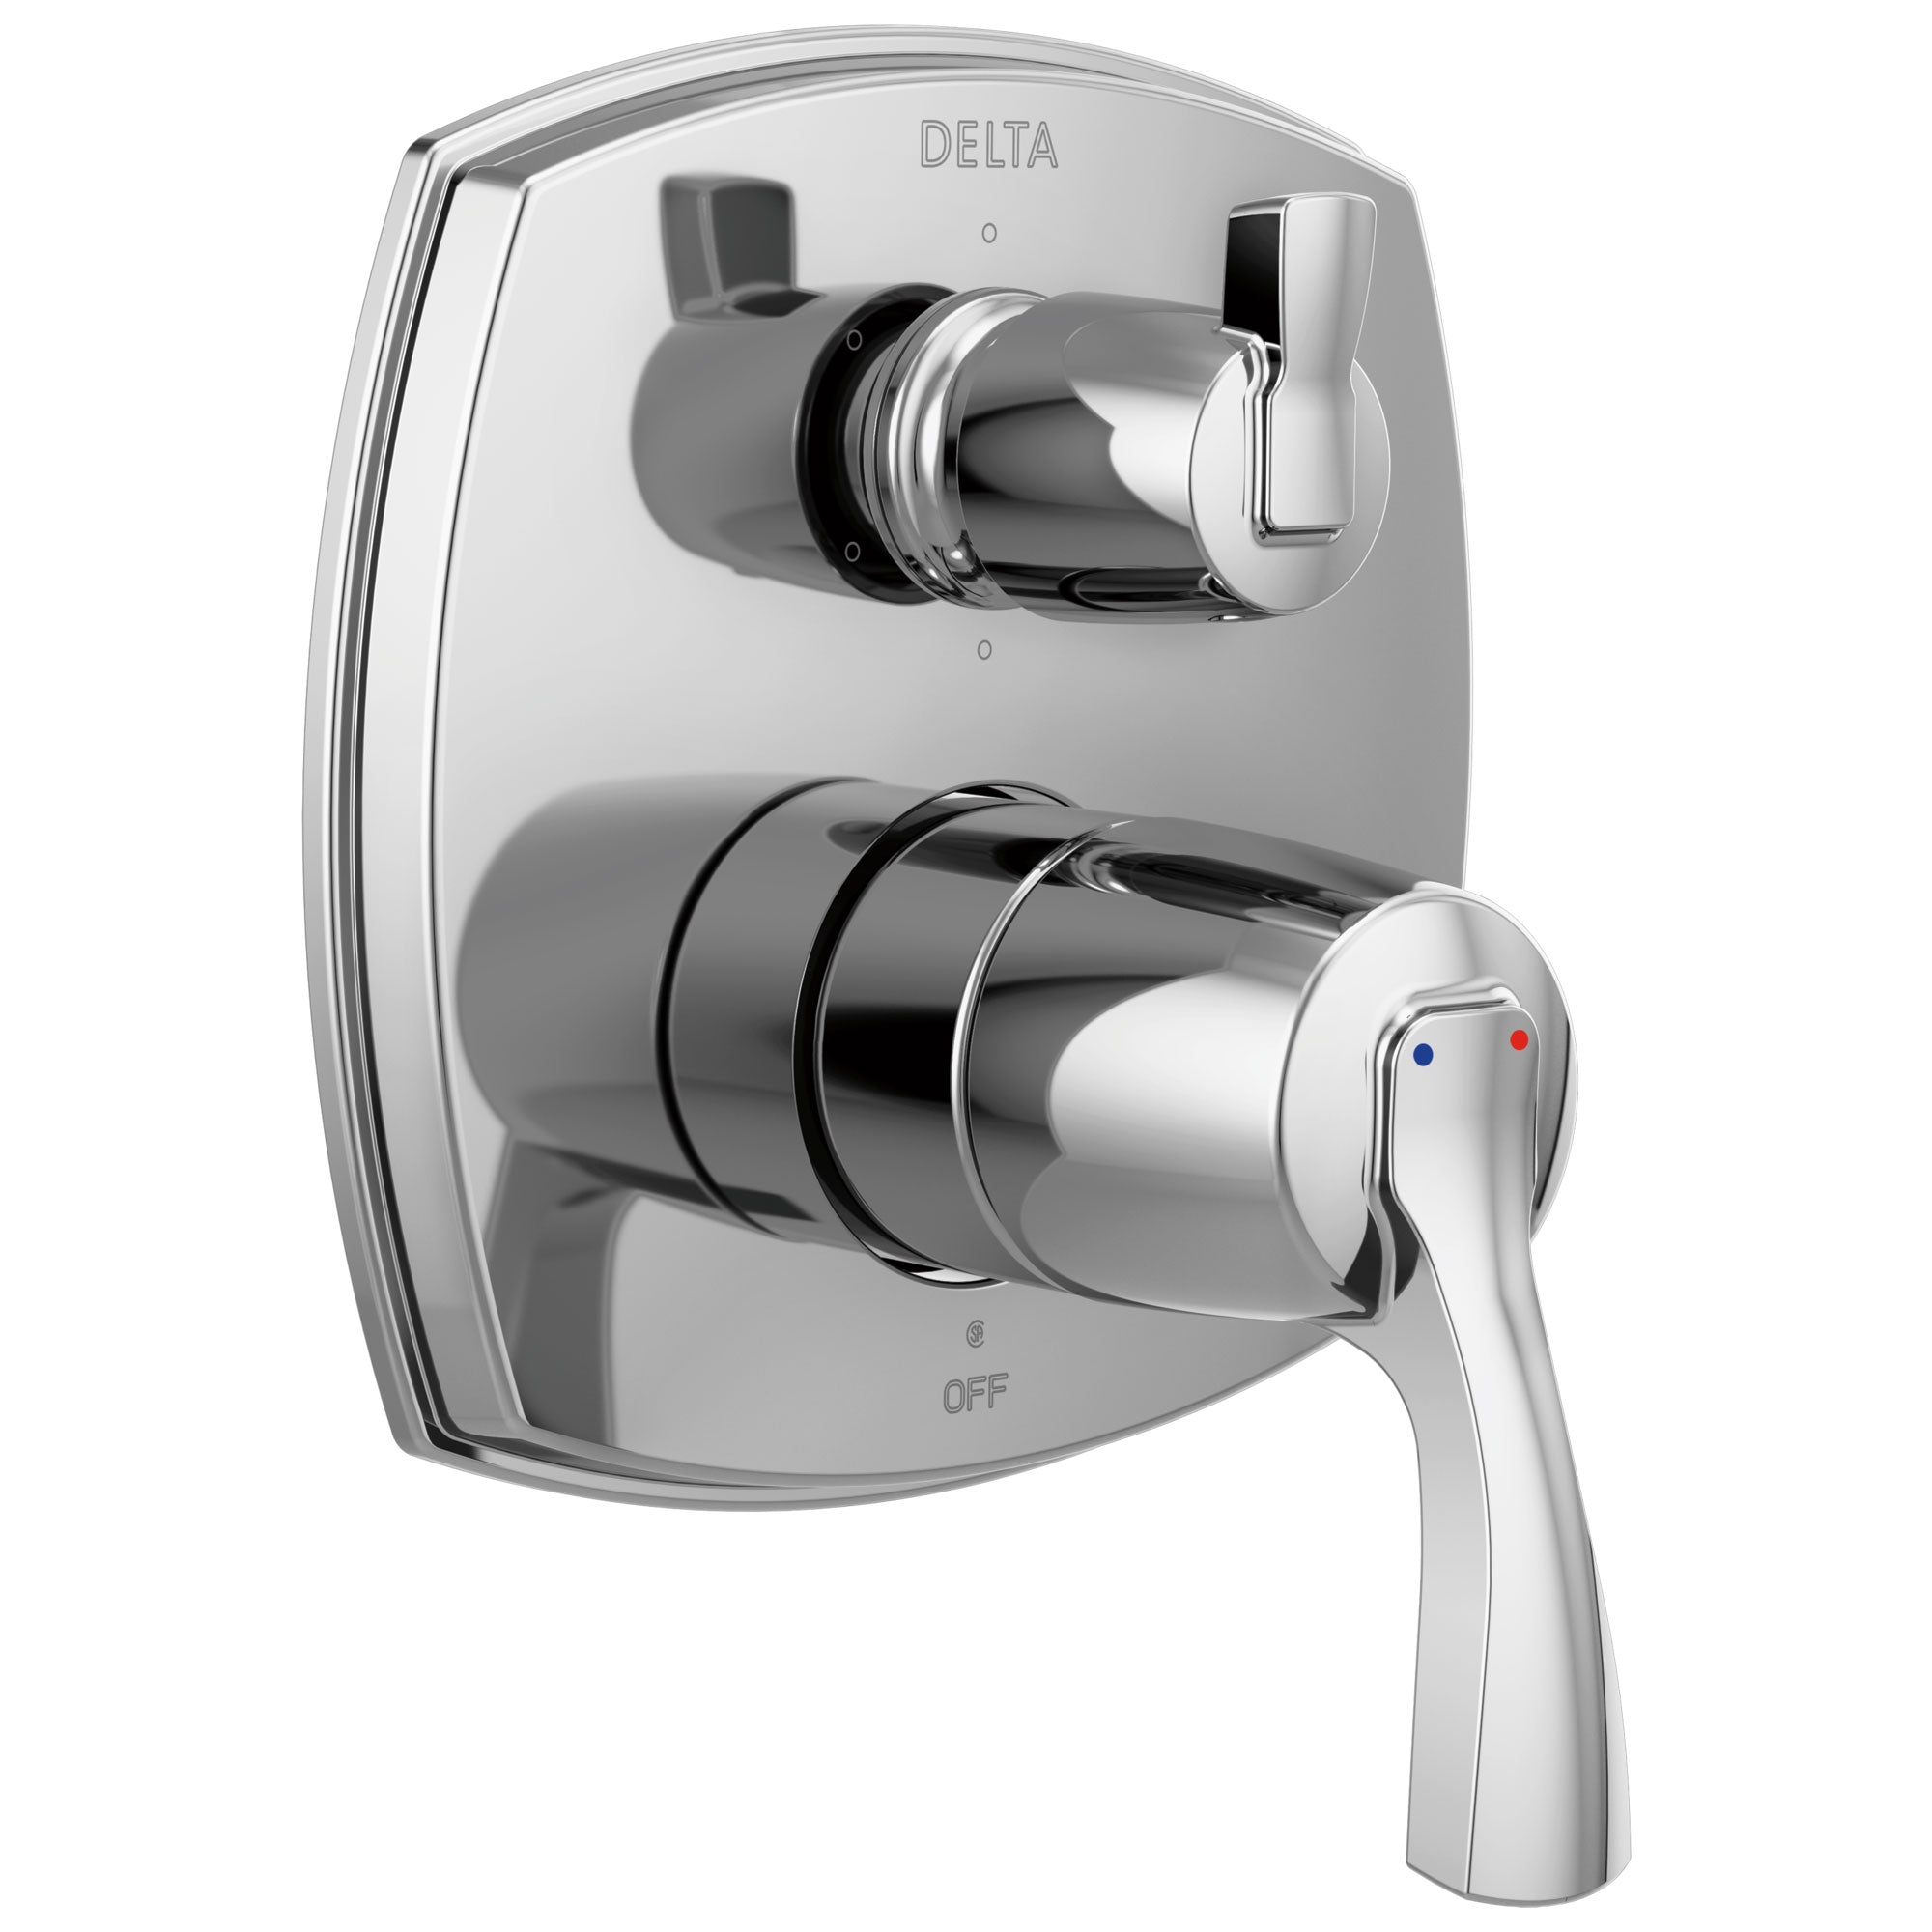 Delta Stryke Chrome Finish 14 Series Shower System Control with Integrated 6 Function Lever Handle Diverter Includes Valve and Handles D3177V